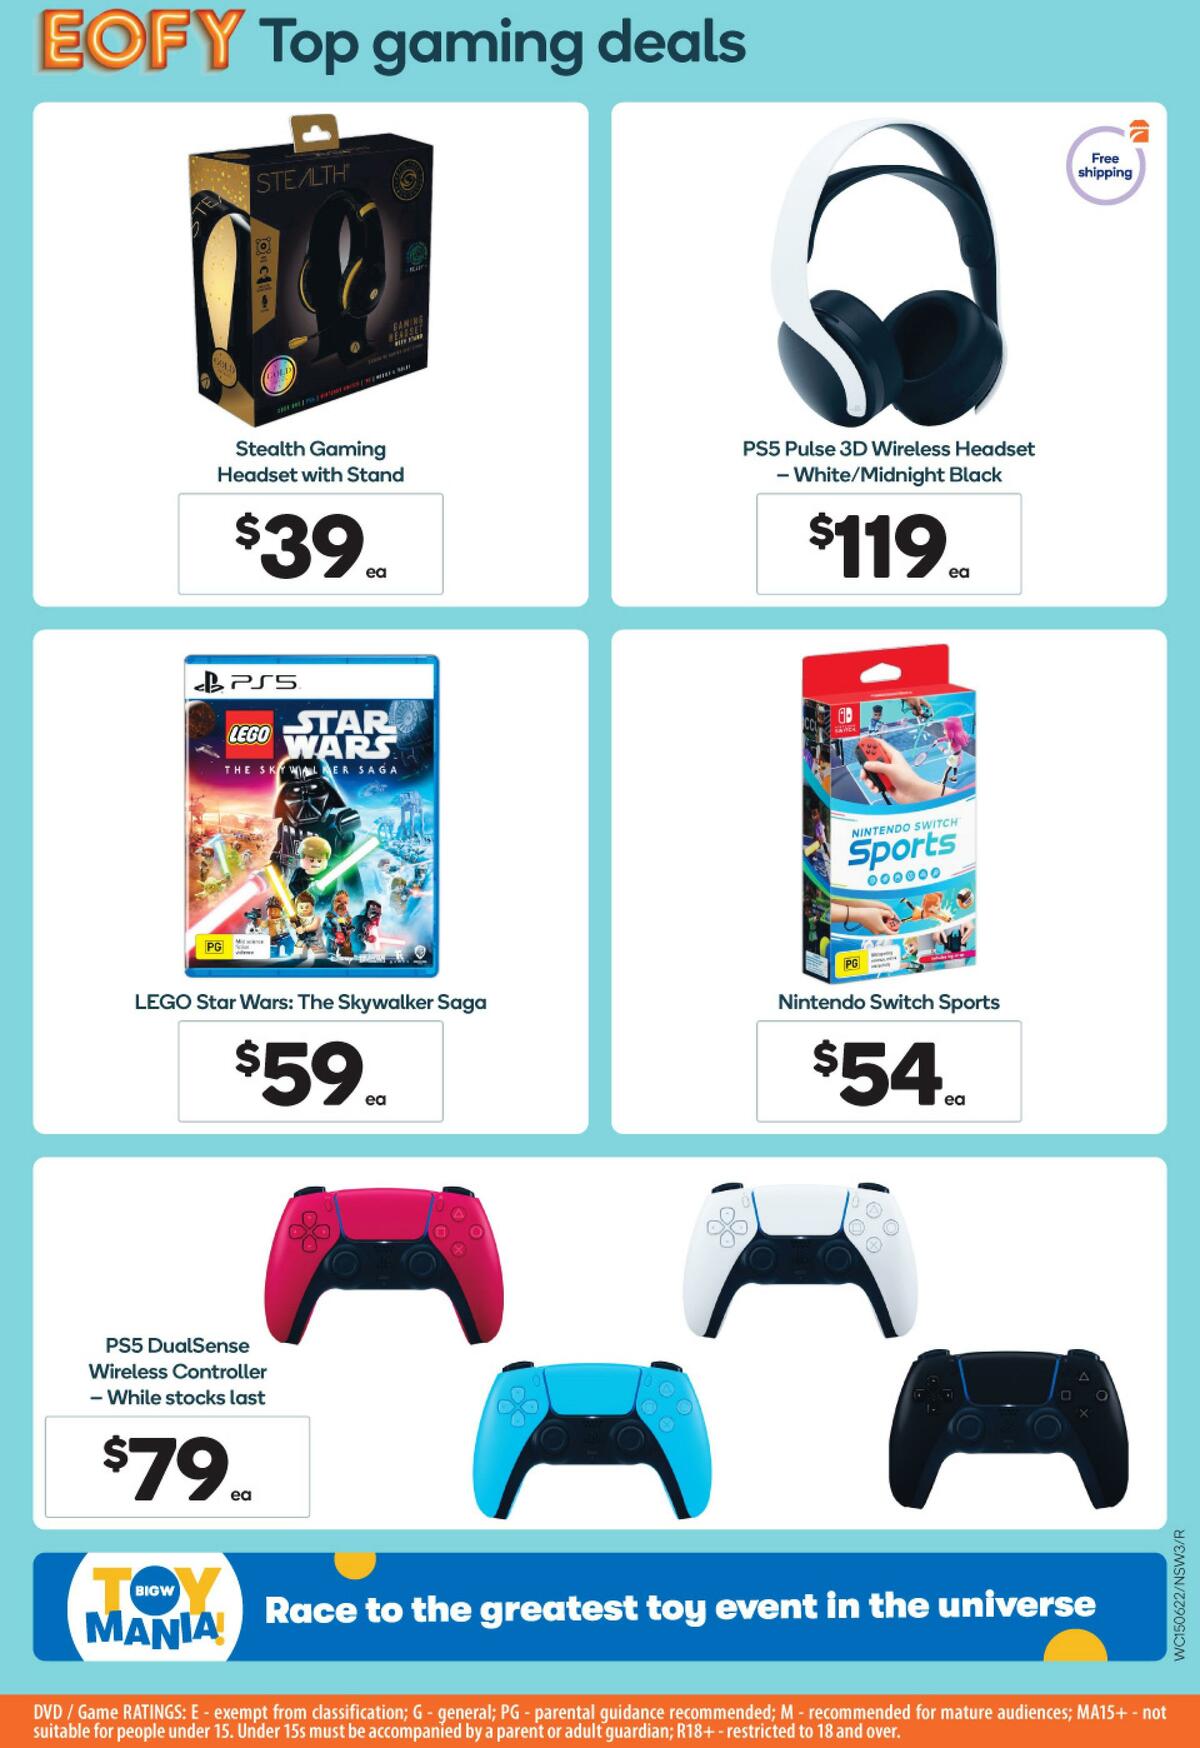 Woolworths Everyday Market Catalogues from 15 June